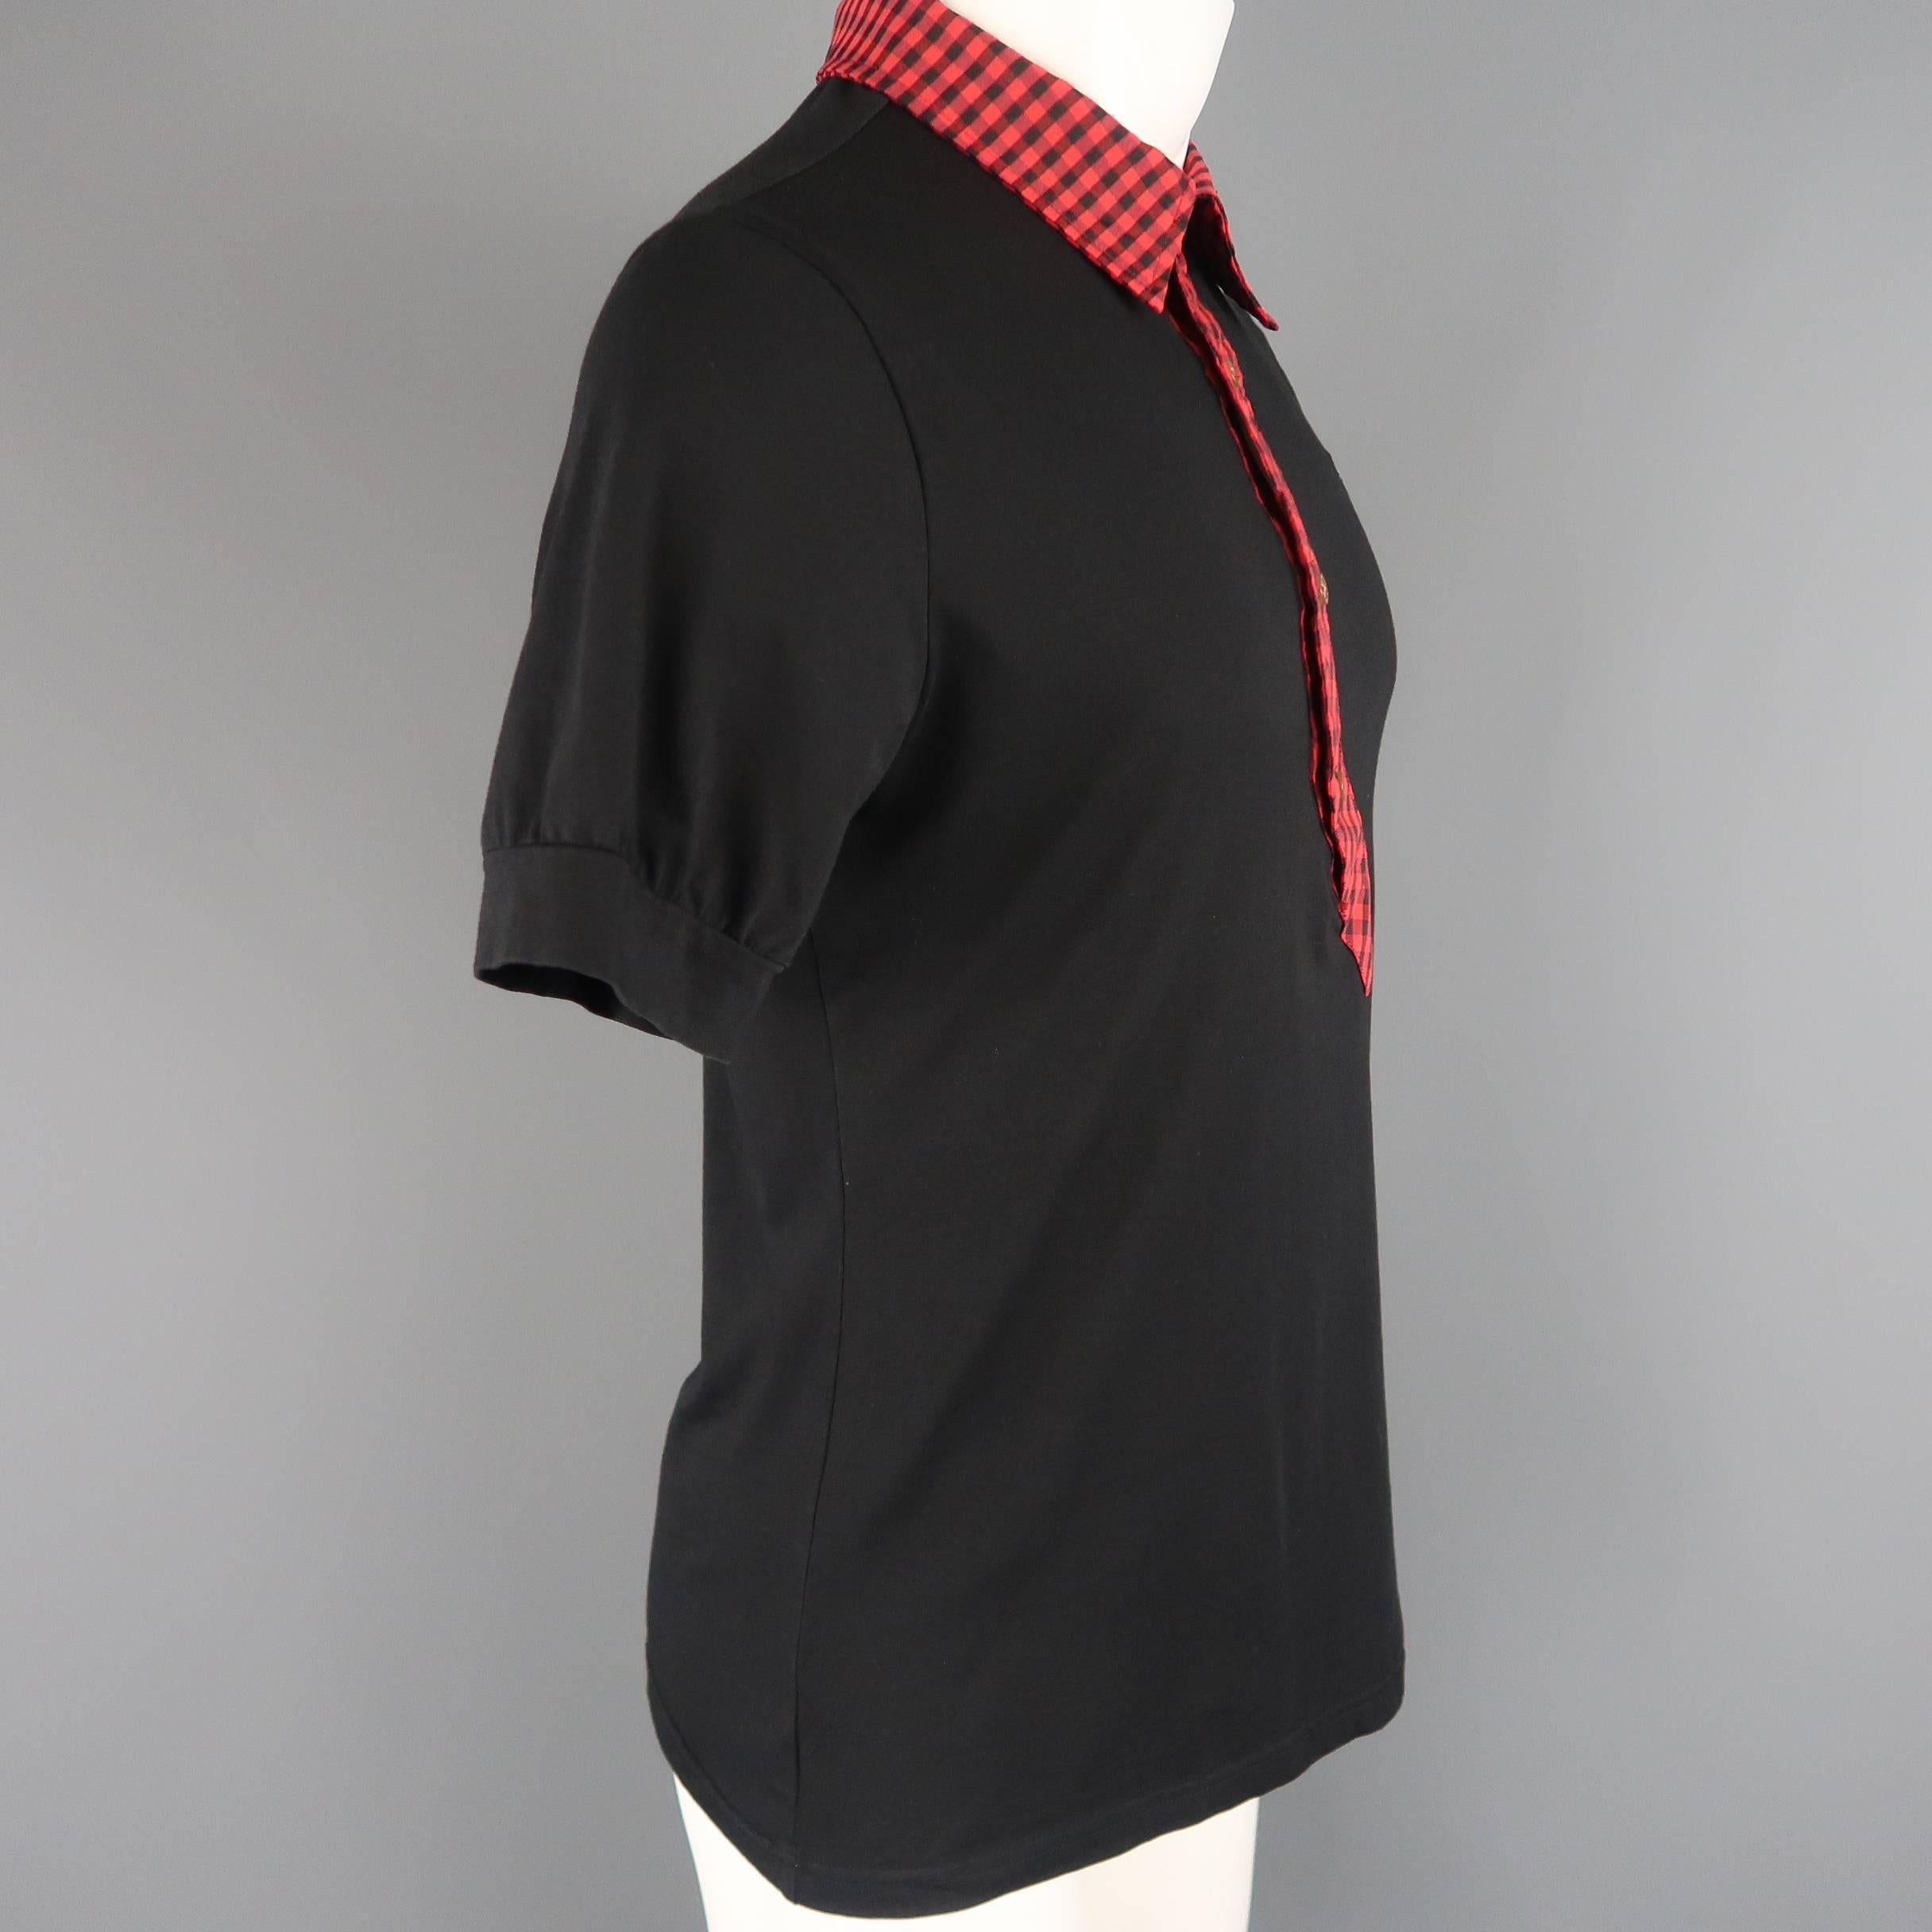 VIVIENNE WESTWOOD Size M Black & Red Gingham Collar Cotton POLO Shirt 1